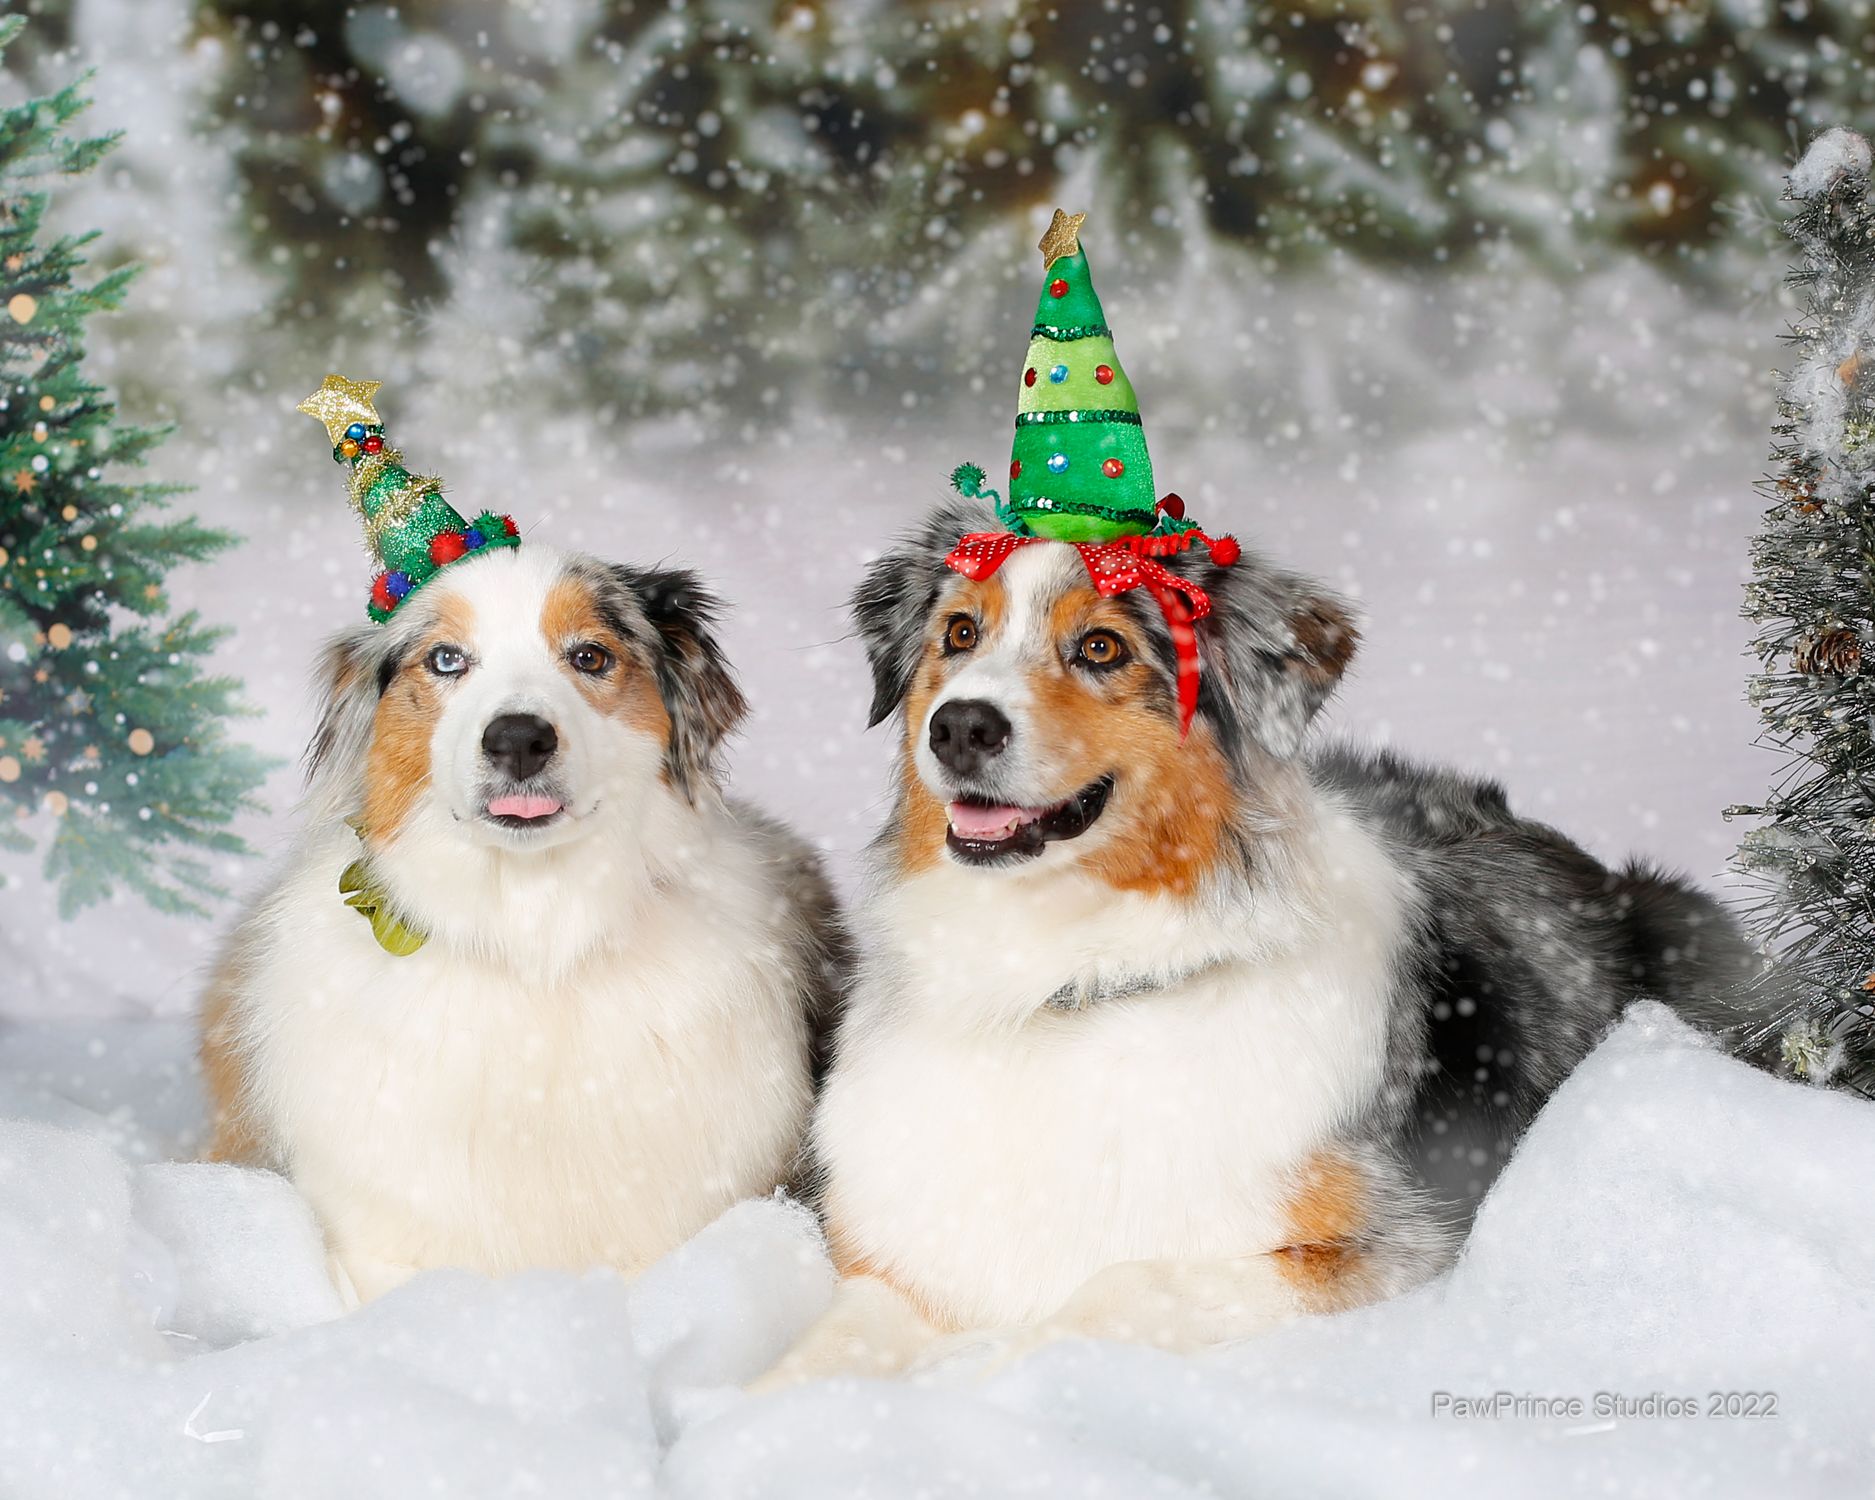 Two Australian shepherds in Christmas tree hats sitting in the snow surrounded by Christmas trees